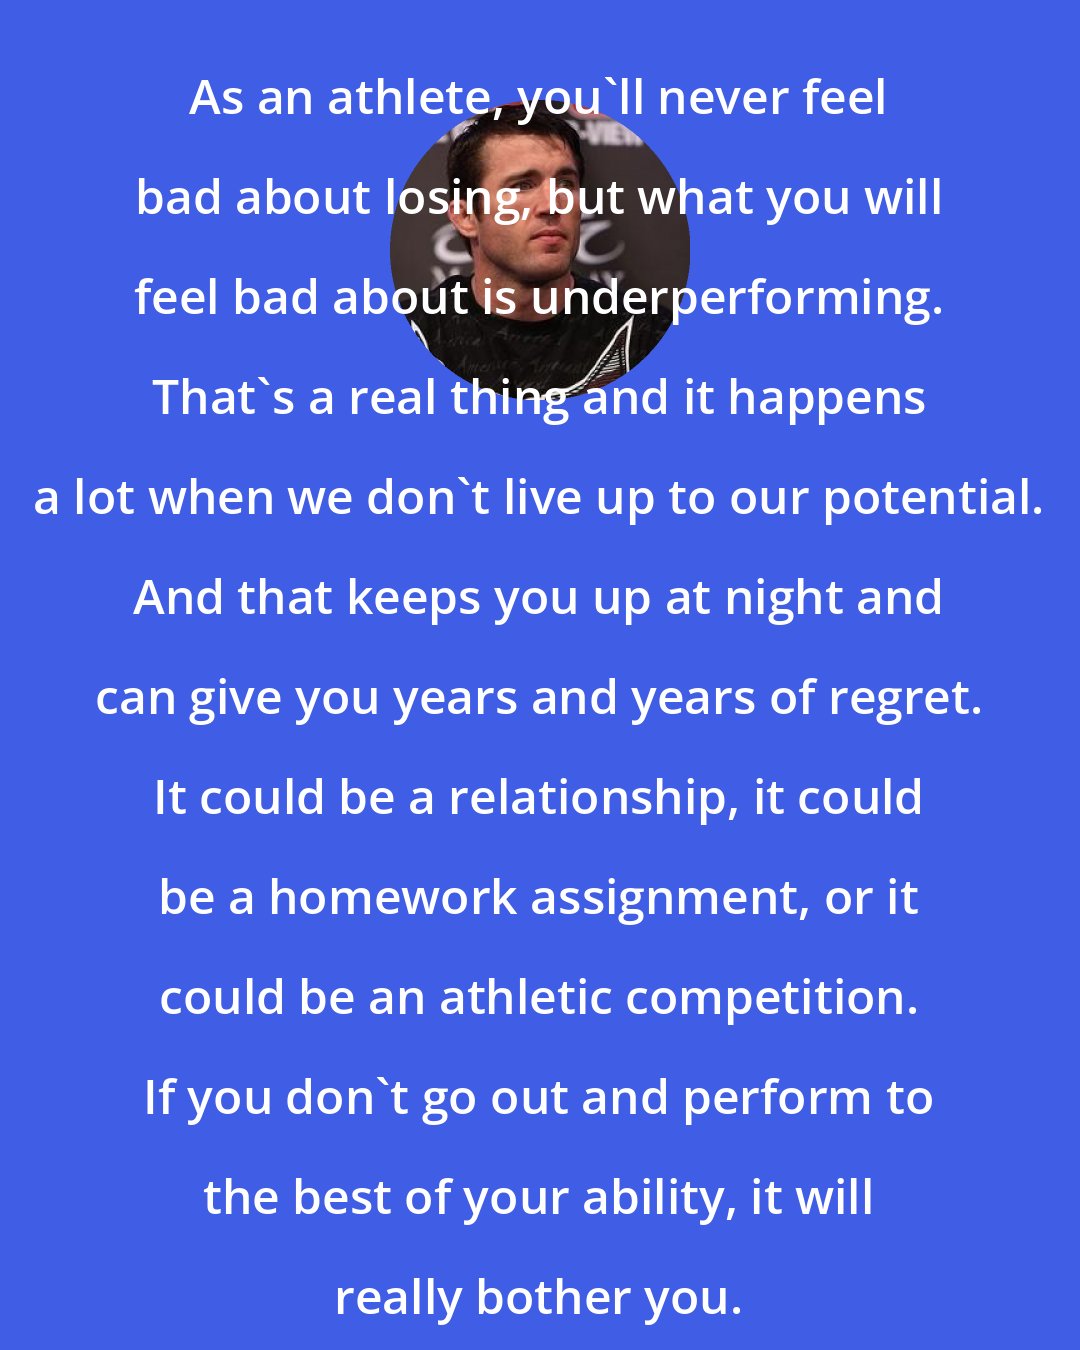 Chael Sonnen: As an athlete, you'll never feel bad about losing, but what you will feel bad about is underperforming. That's a real thing and it happens a lot when we don't live up to our potential. And that keeps you up at night and can give you years and years of regret. It could be a relationship, it could be a homework assignment, or it could be an athletic competition. If you don't go out and perform to the best of your ability, it will really bother you.